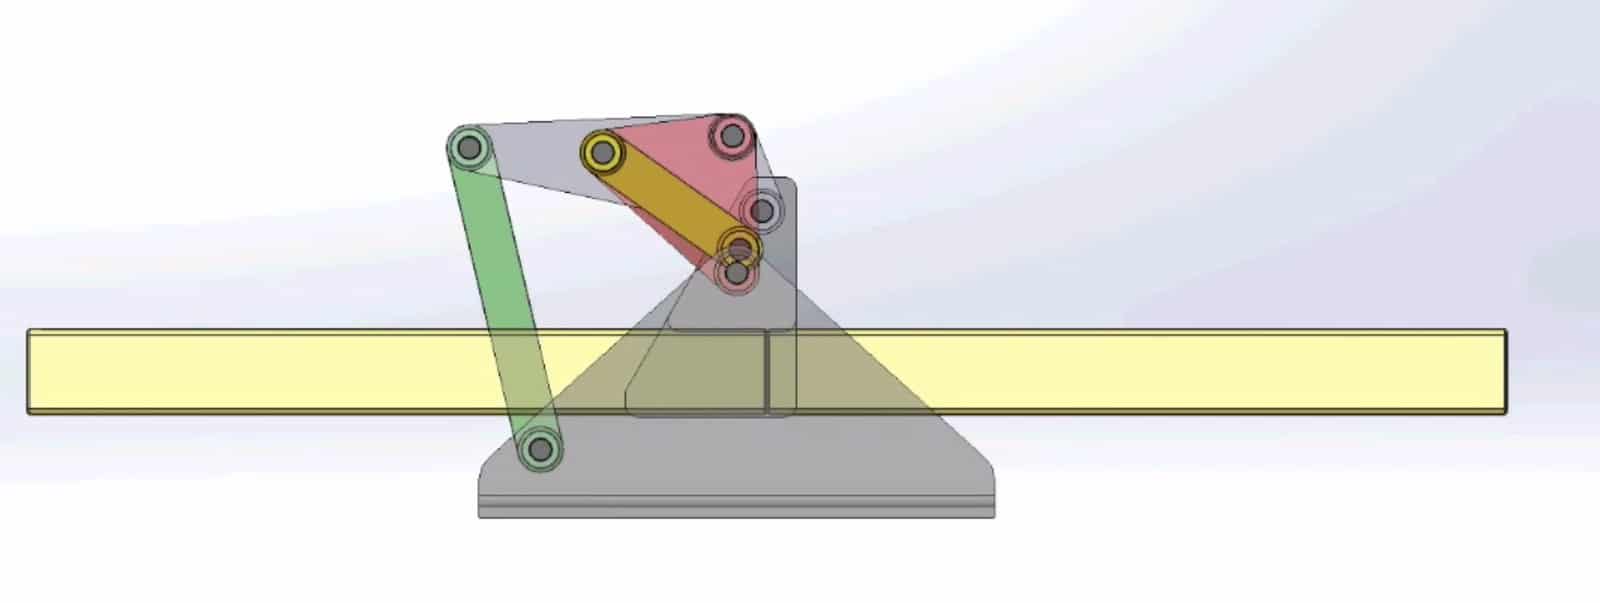 A six-bar linkage designed to fold a structure